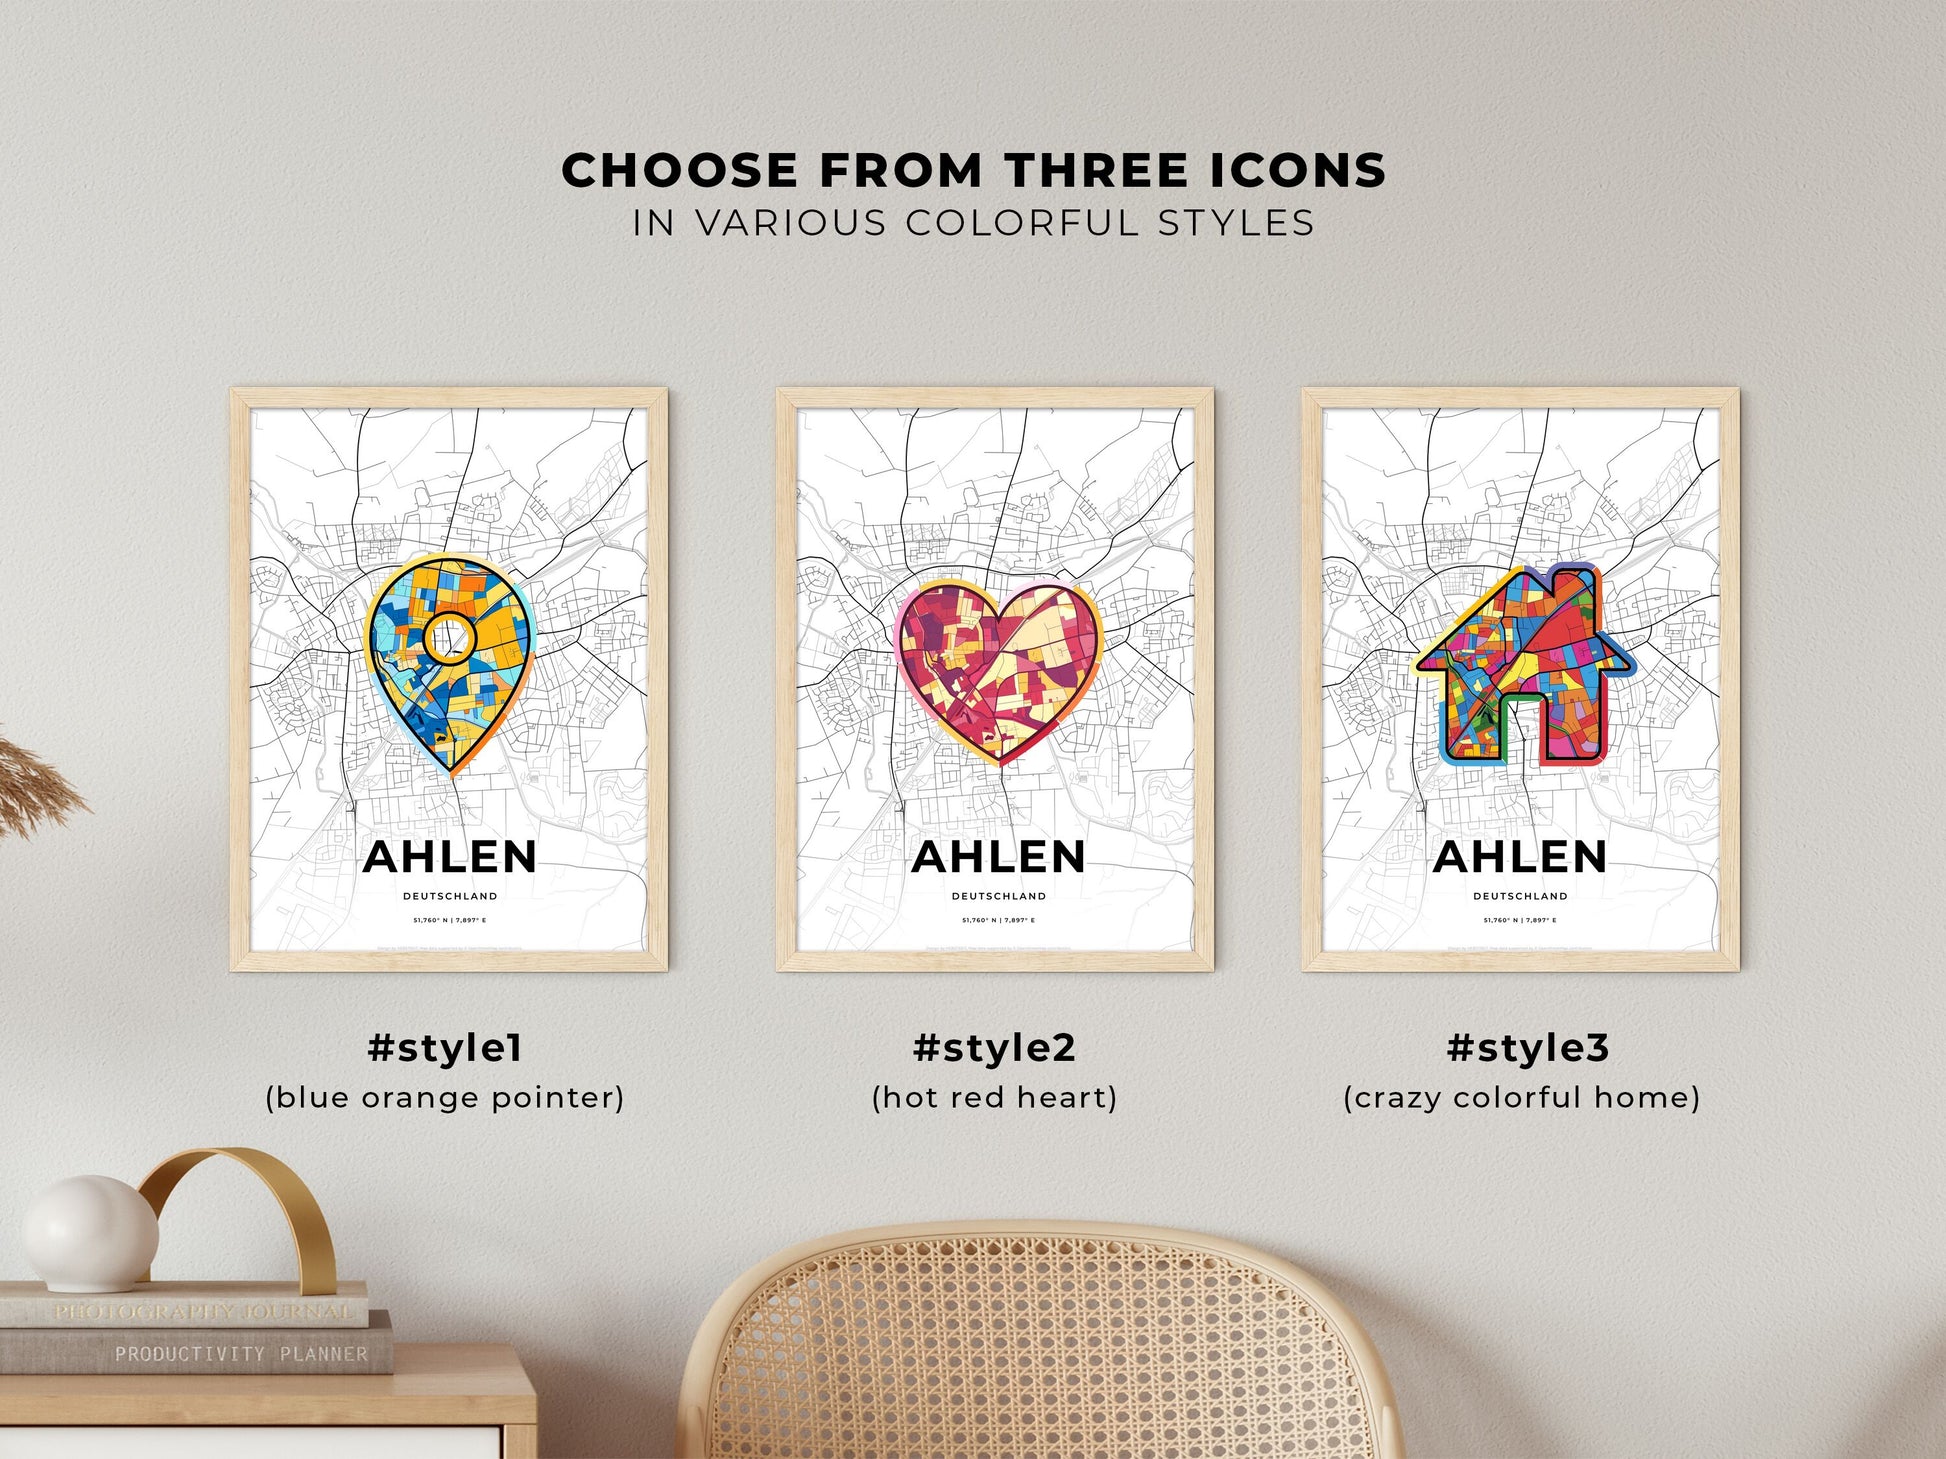 AHLEN GERMANY minimal art map with a colorful icon. Where it all began, Couple map gift.